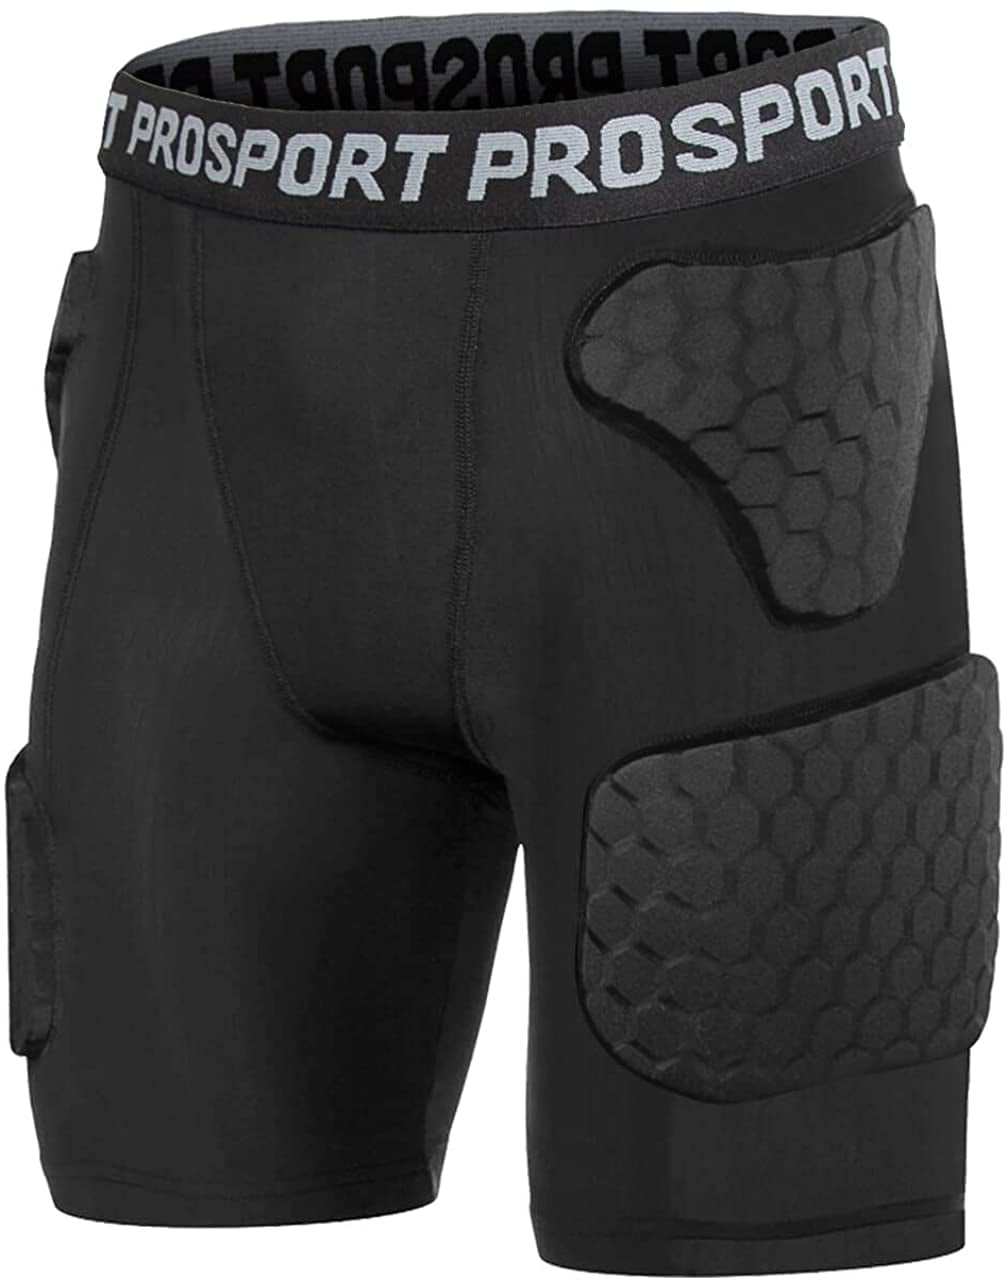 TUOY Youth Boy's Padded Compression Shorts Rib Chest Protector